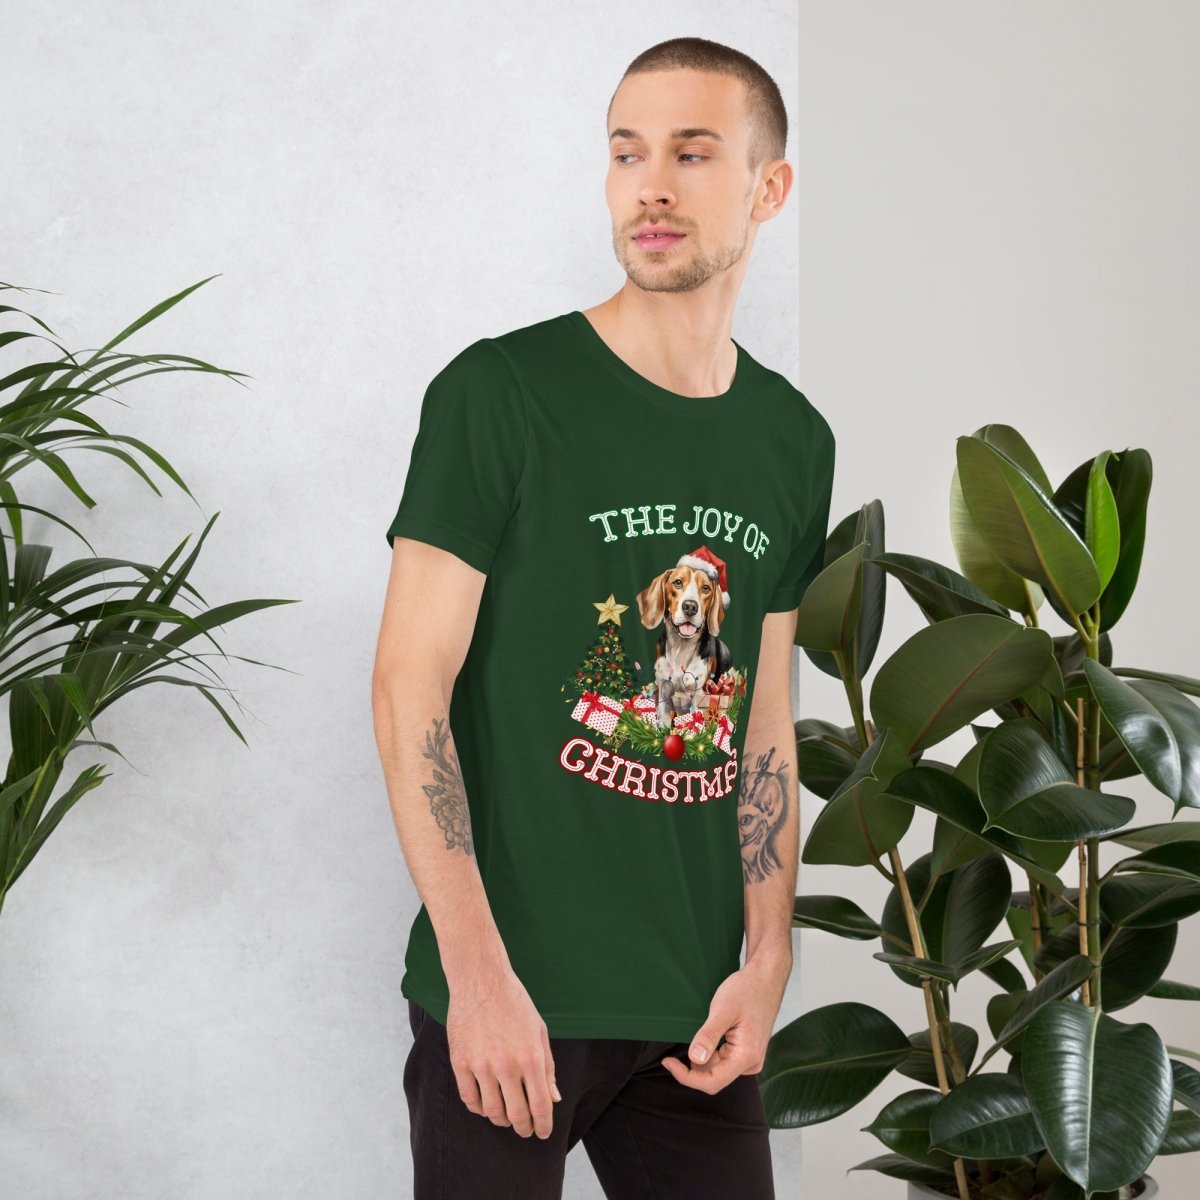 Christmas Beagle Dog T-Shirt - High Quality Festive Unisex T-Shirt, Gift for Beagle Owner, Gift for Doglovers, Cute Xmas Dog Tee - Everything Pixel